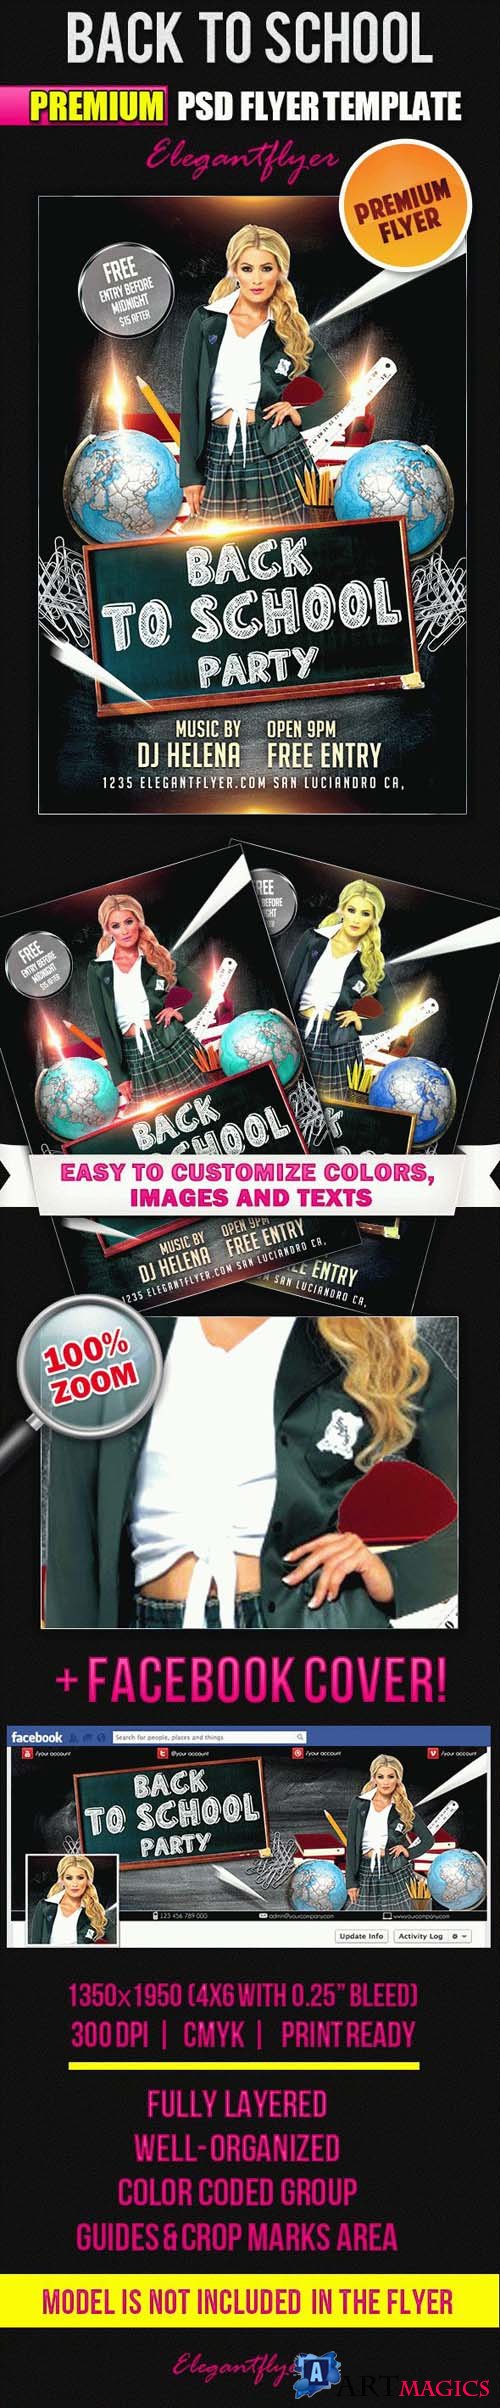 Back to School Party PSD Flyer